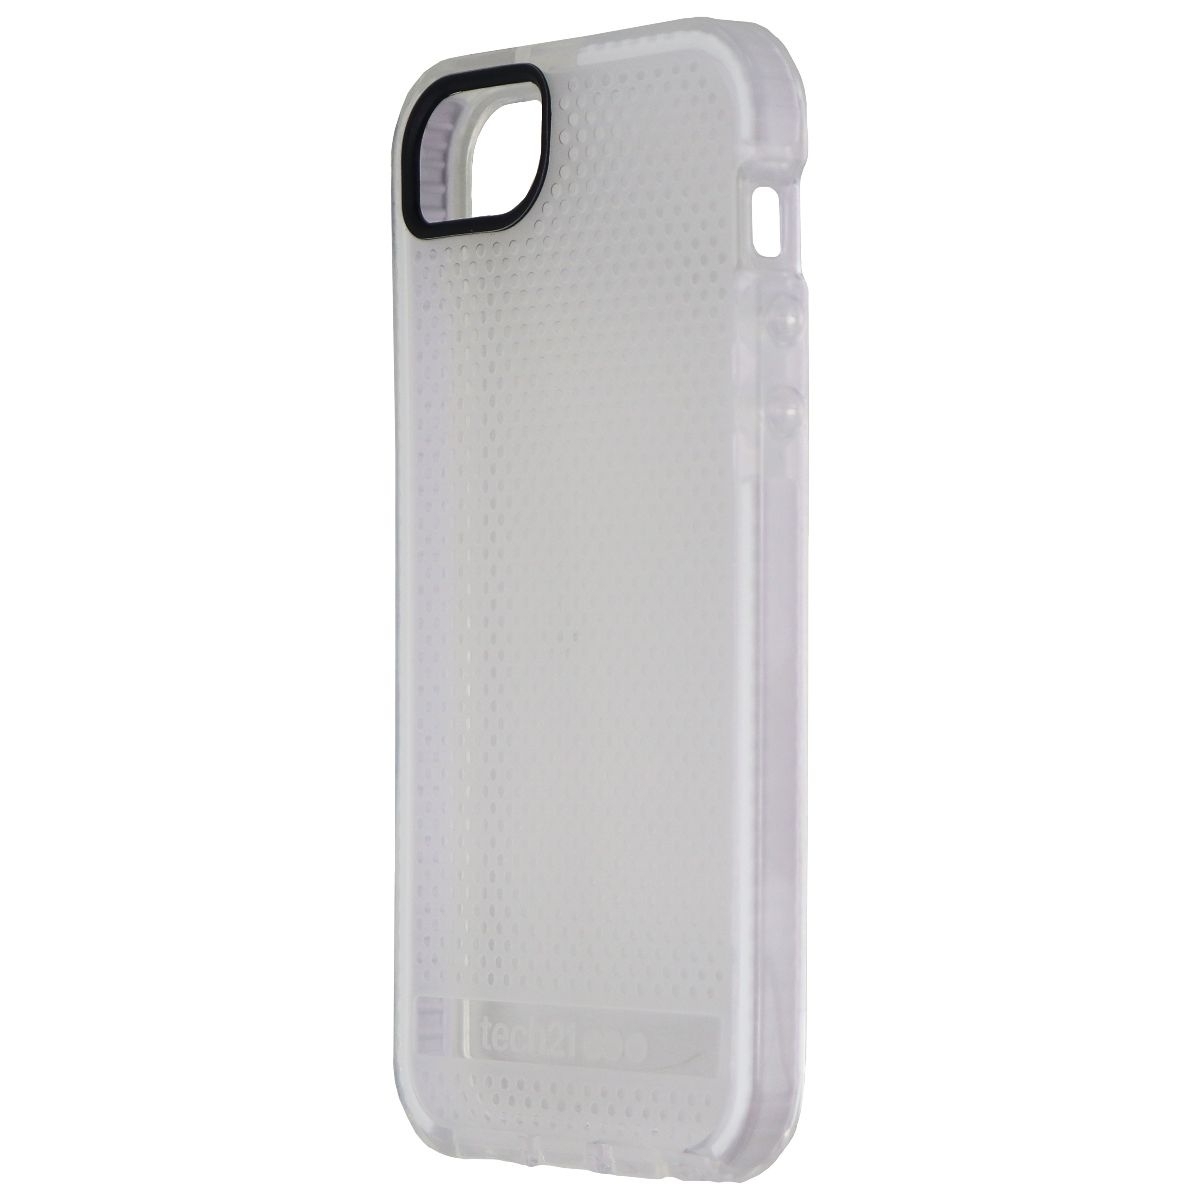 Tech21 Evo Mesh Flexible Gel Case Cover For Apple IPhone SE 5s 5 - Clear / White